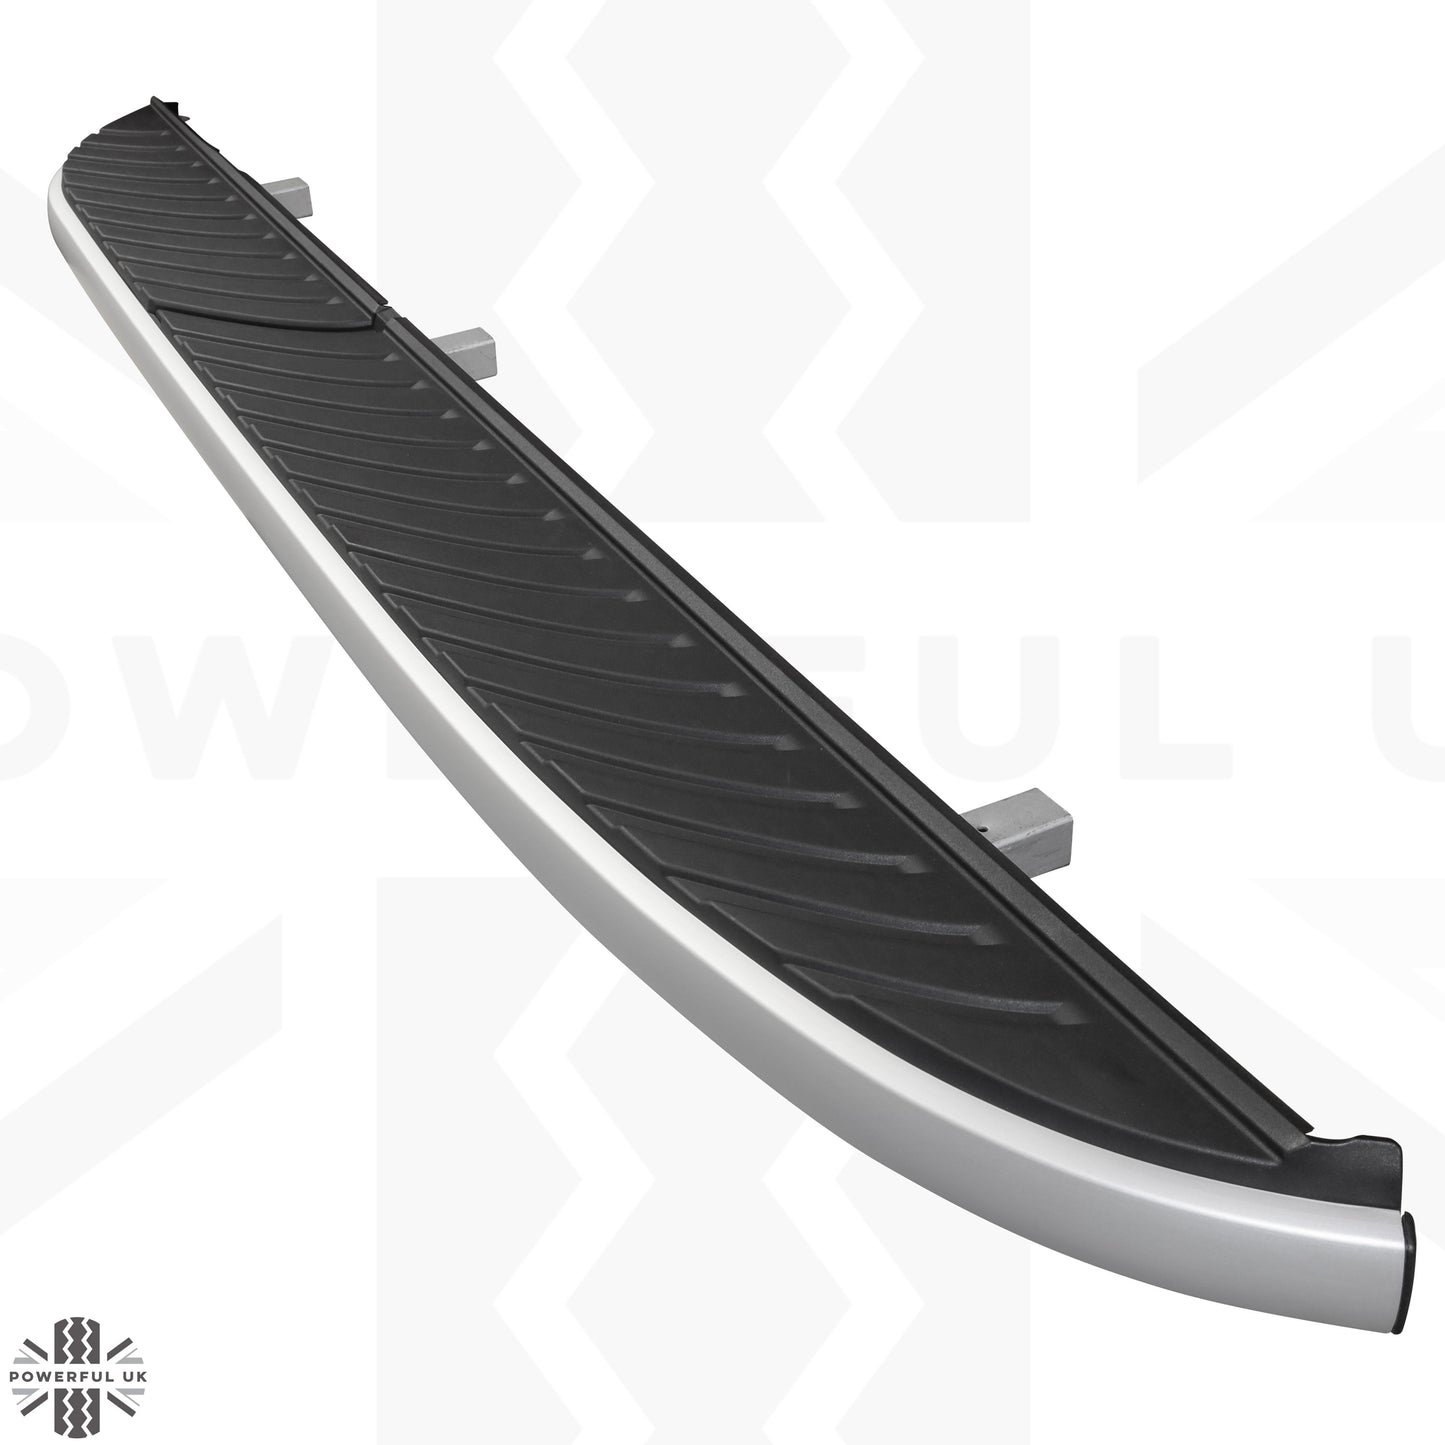 Genuine Replacement SIDE STEP ONLY for Land Rover Freelander 2 - RIGHT